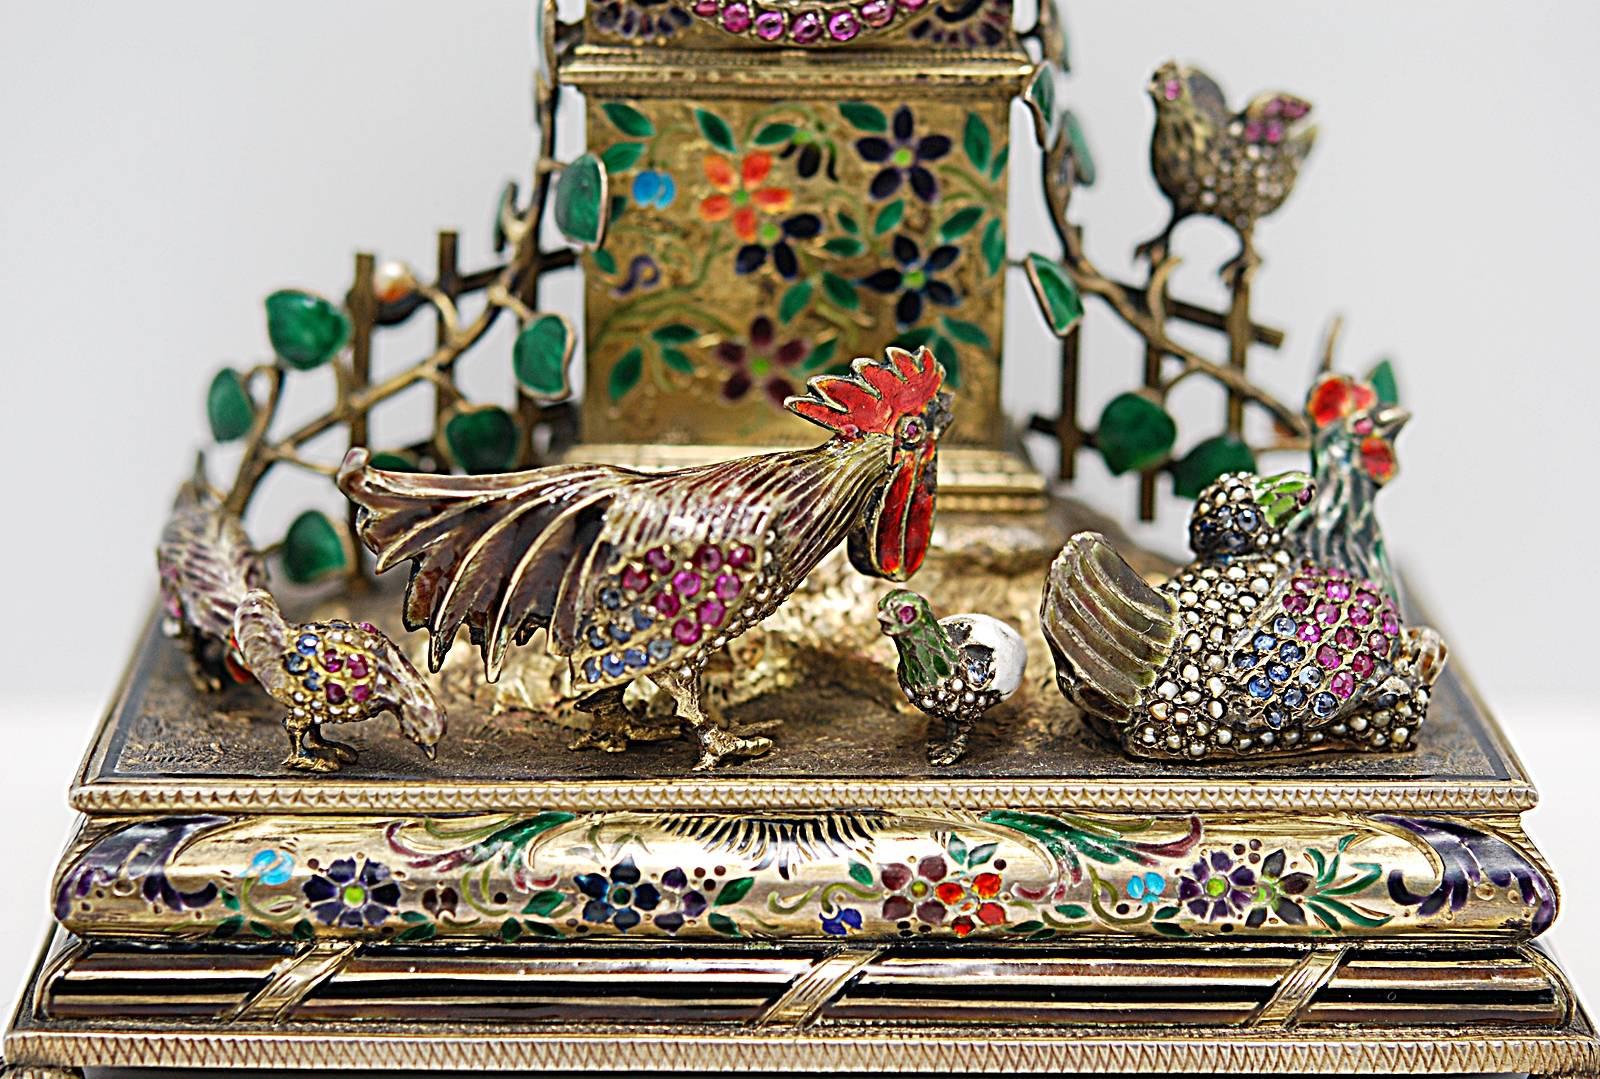 A gorgeous Viennese jeweled silver gilt Tower clock with an active barnyard scene in the foreground. The chickens are decorated with seed pearls, natural cabochon rubies and sapphires. The base of the clock tower is beautifully decorated with